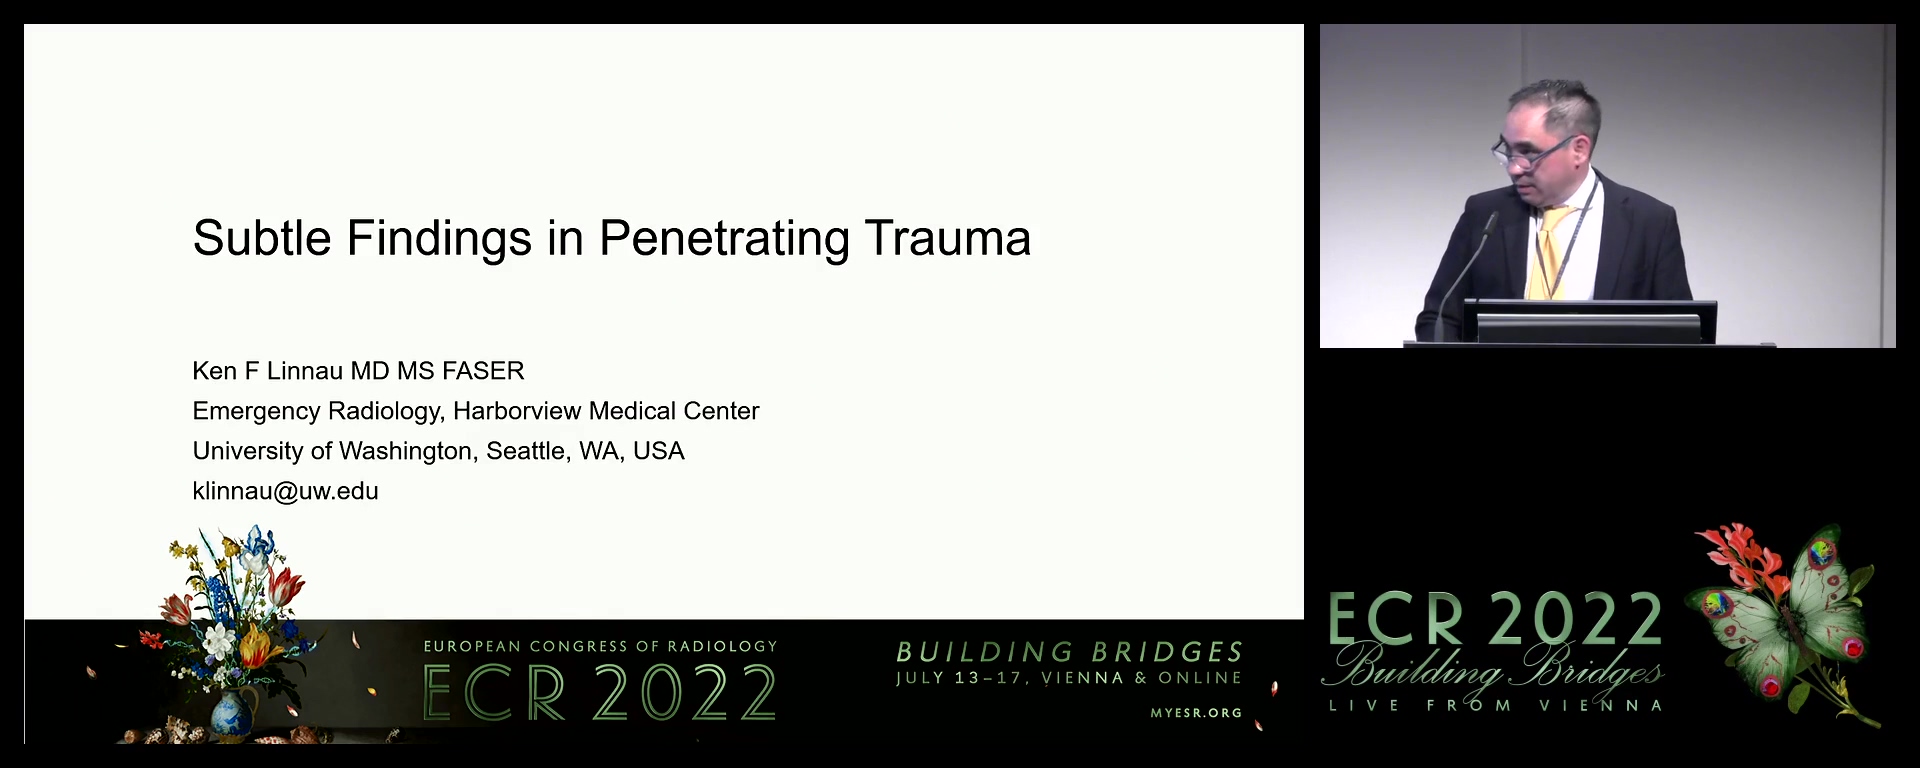 Subtle injuries in penetrating trauma